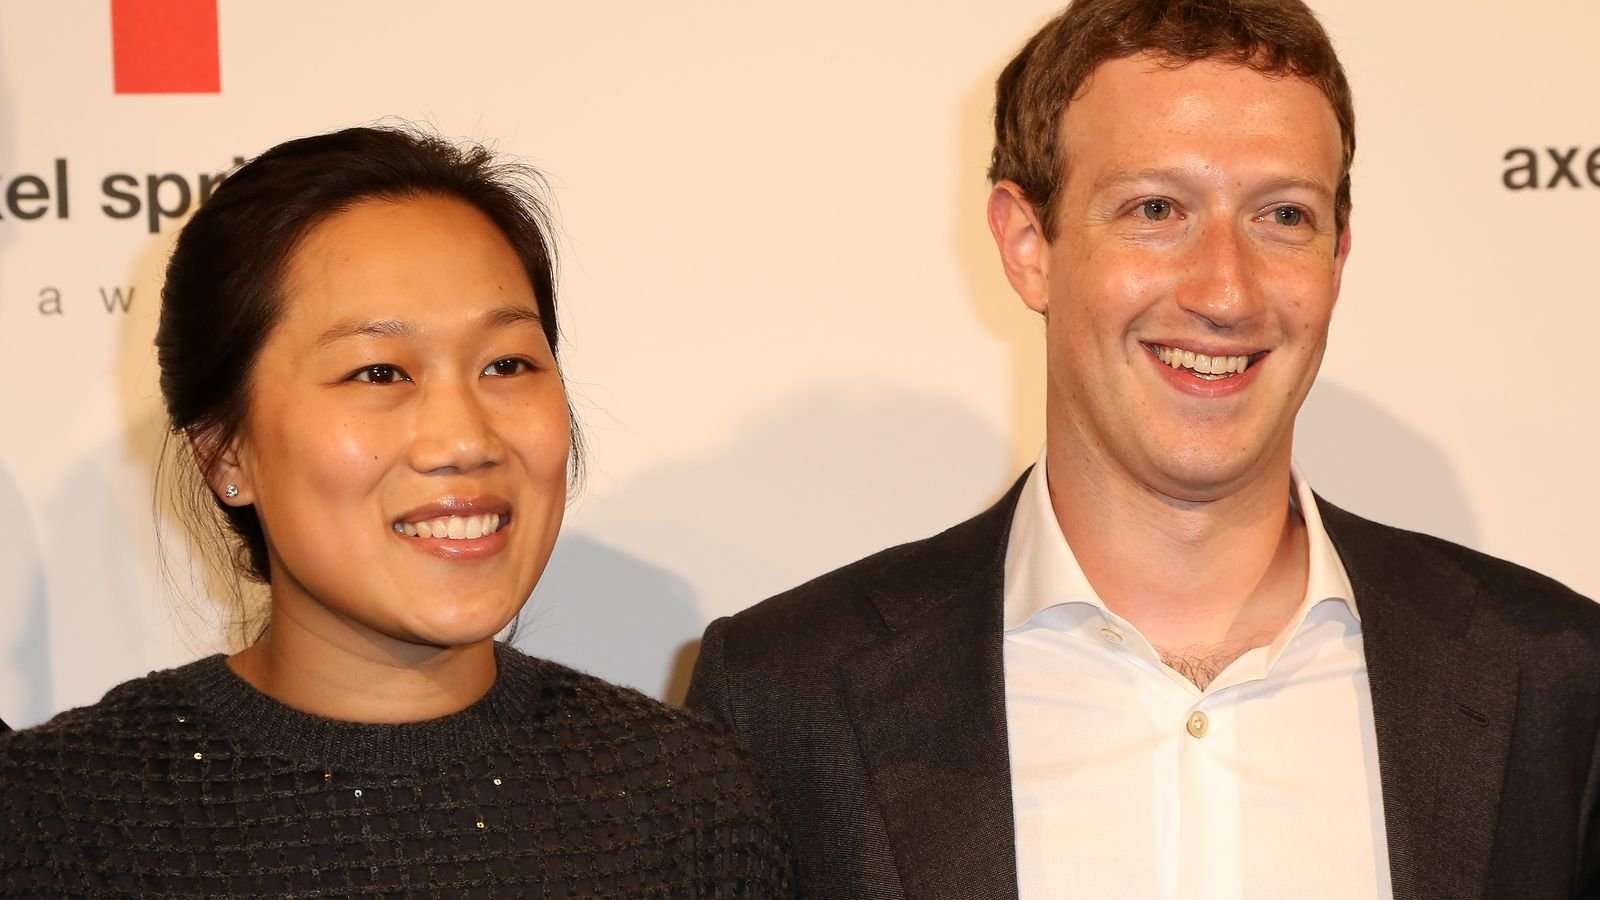 image for Mark Zuckerberg drops Hawaiian land lawsuits after outcry